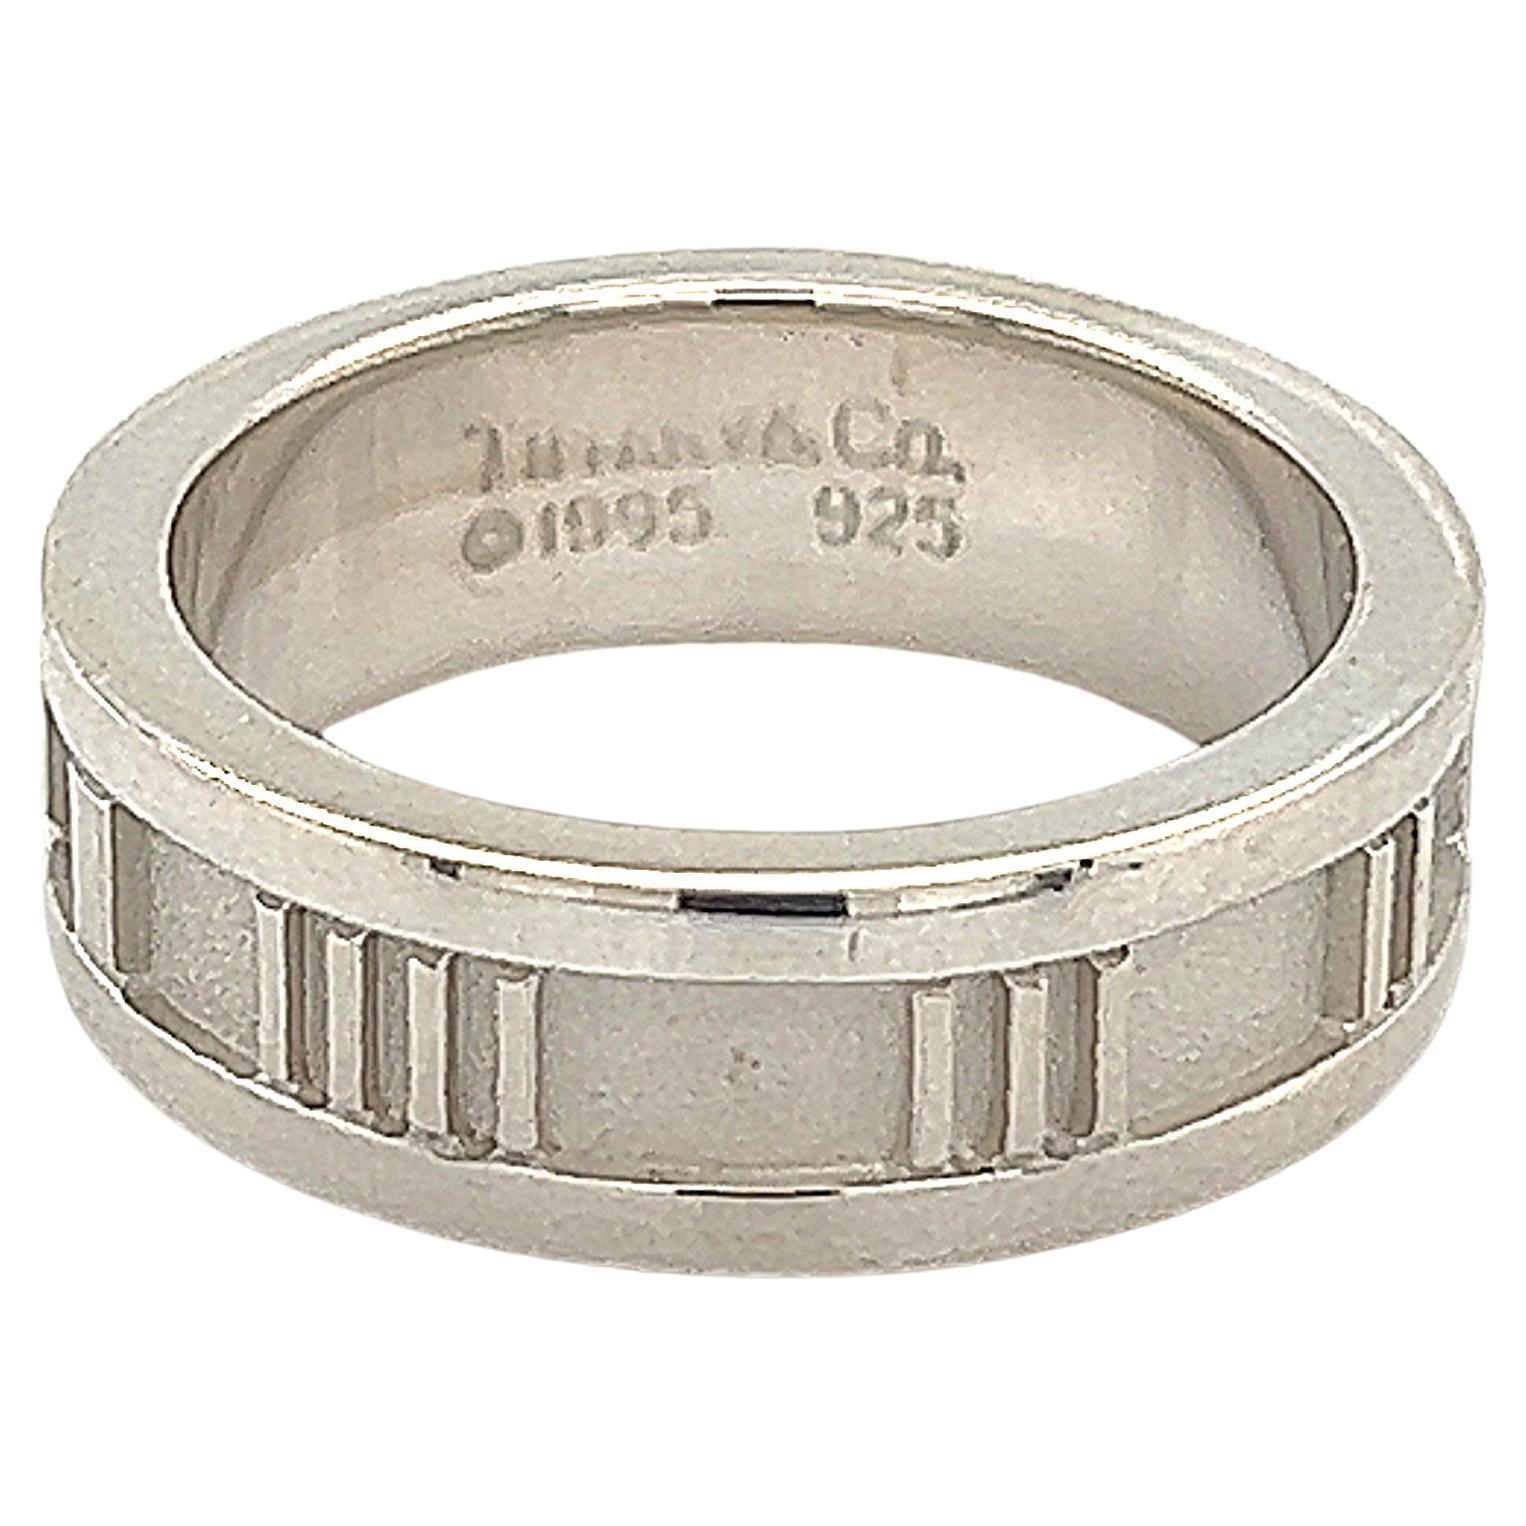 Tiffany & Co. Estate Atlas Ring 4 Silver 6 mm Height